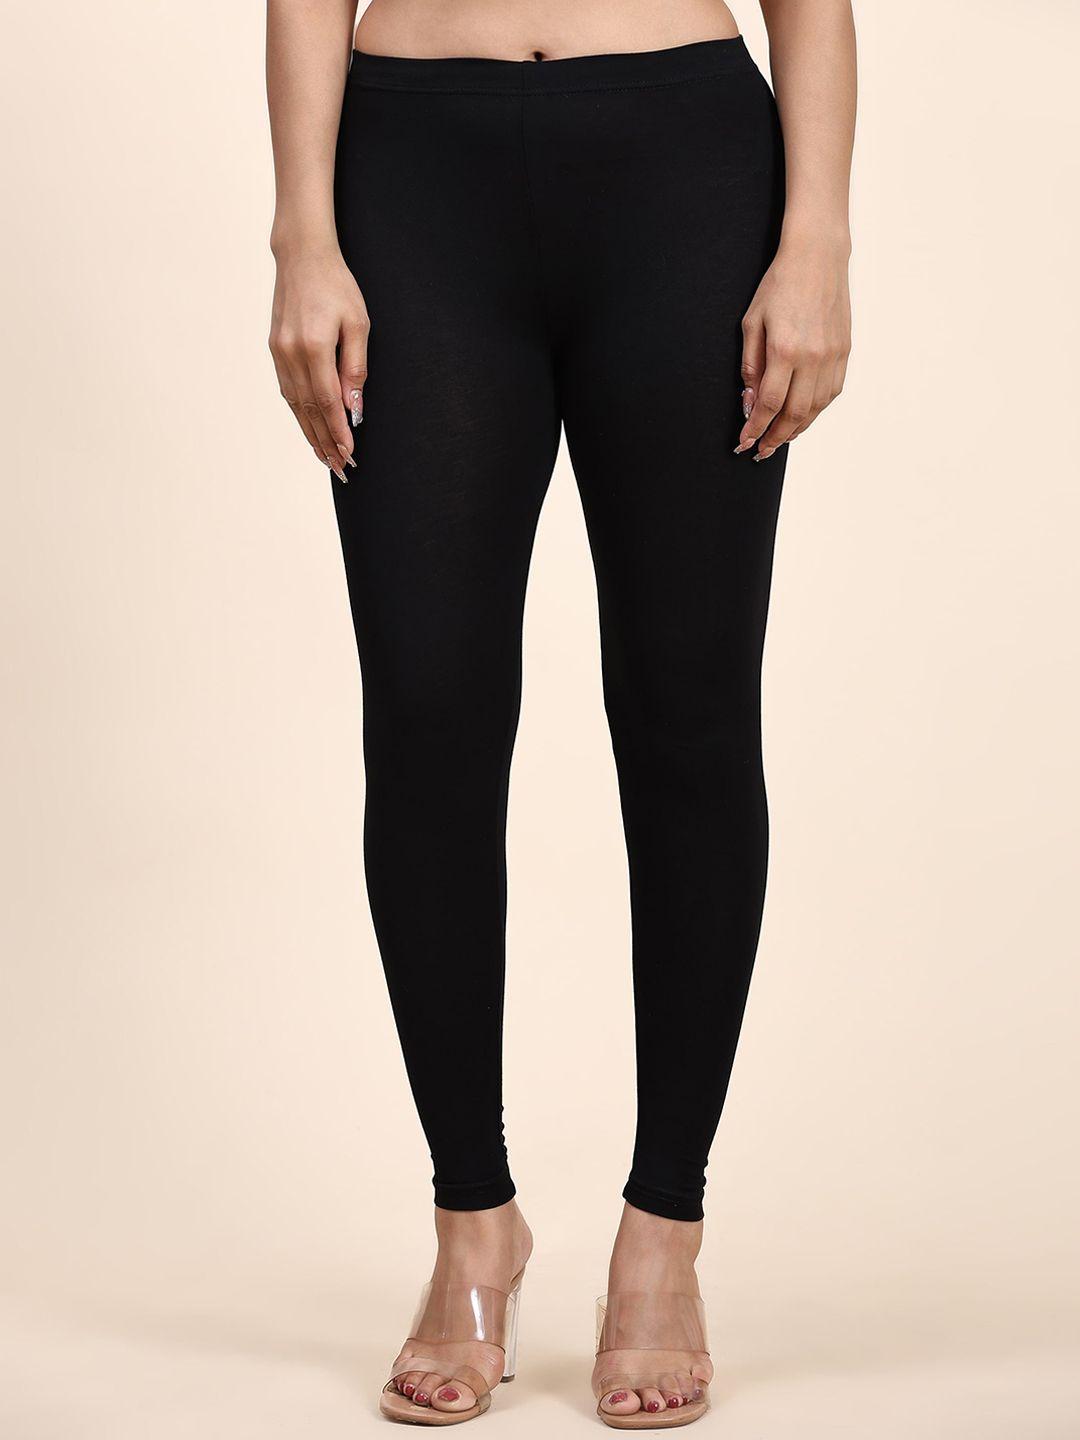 outflits skinny-fit ankle length leggings